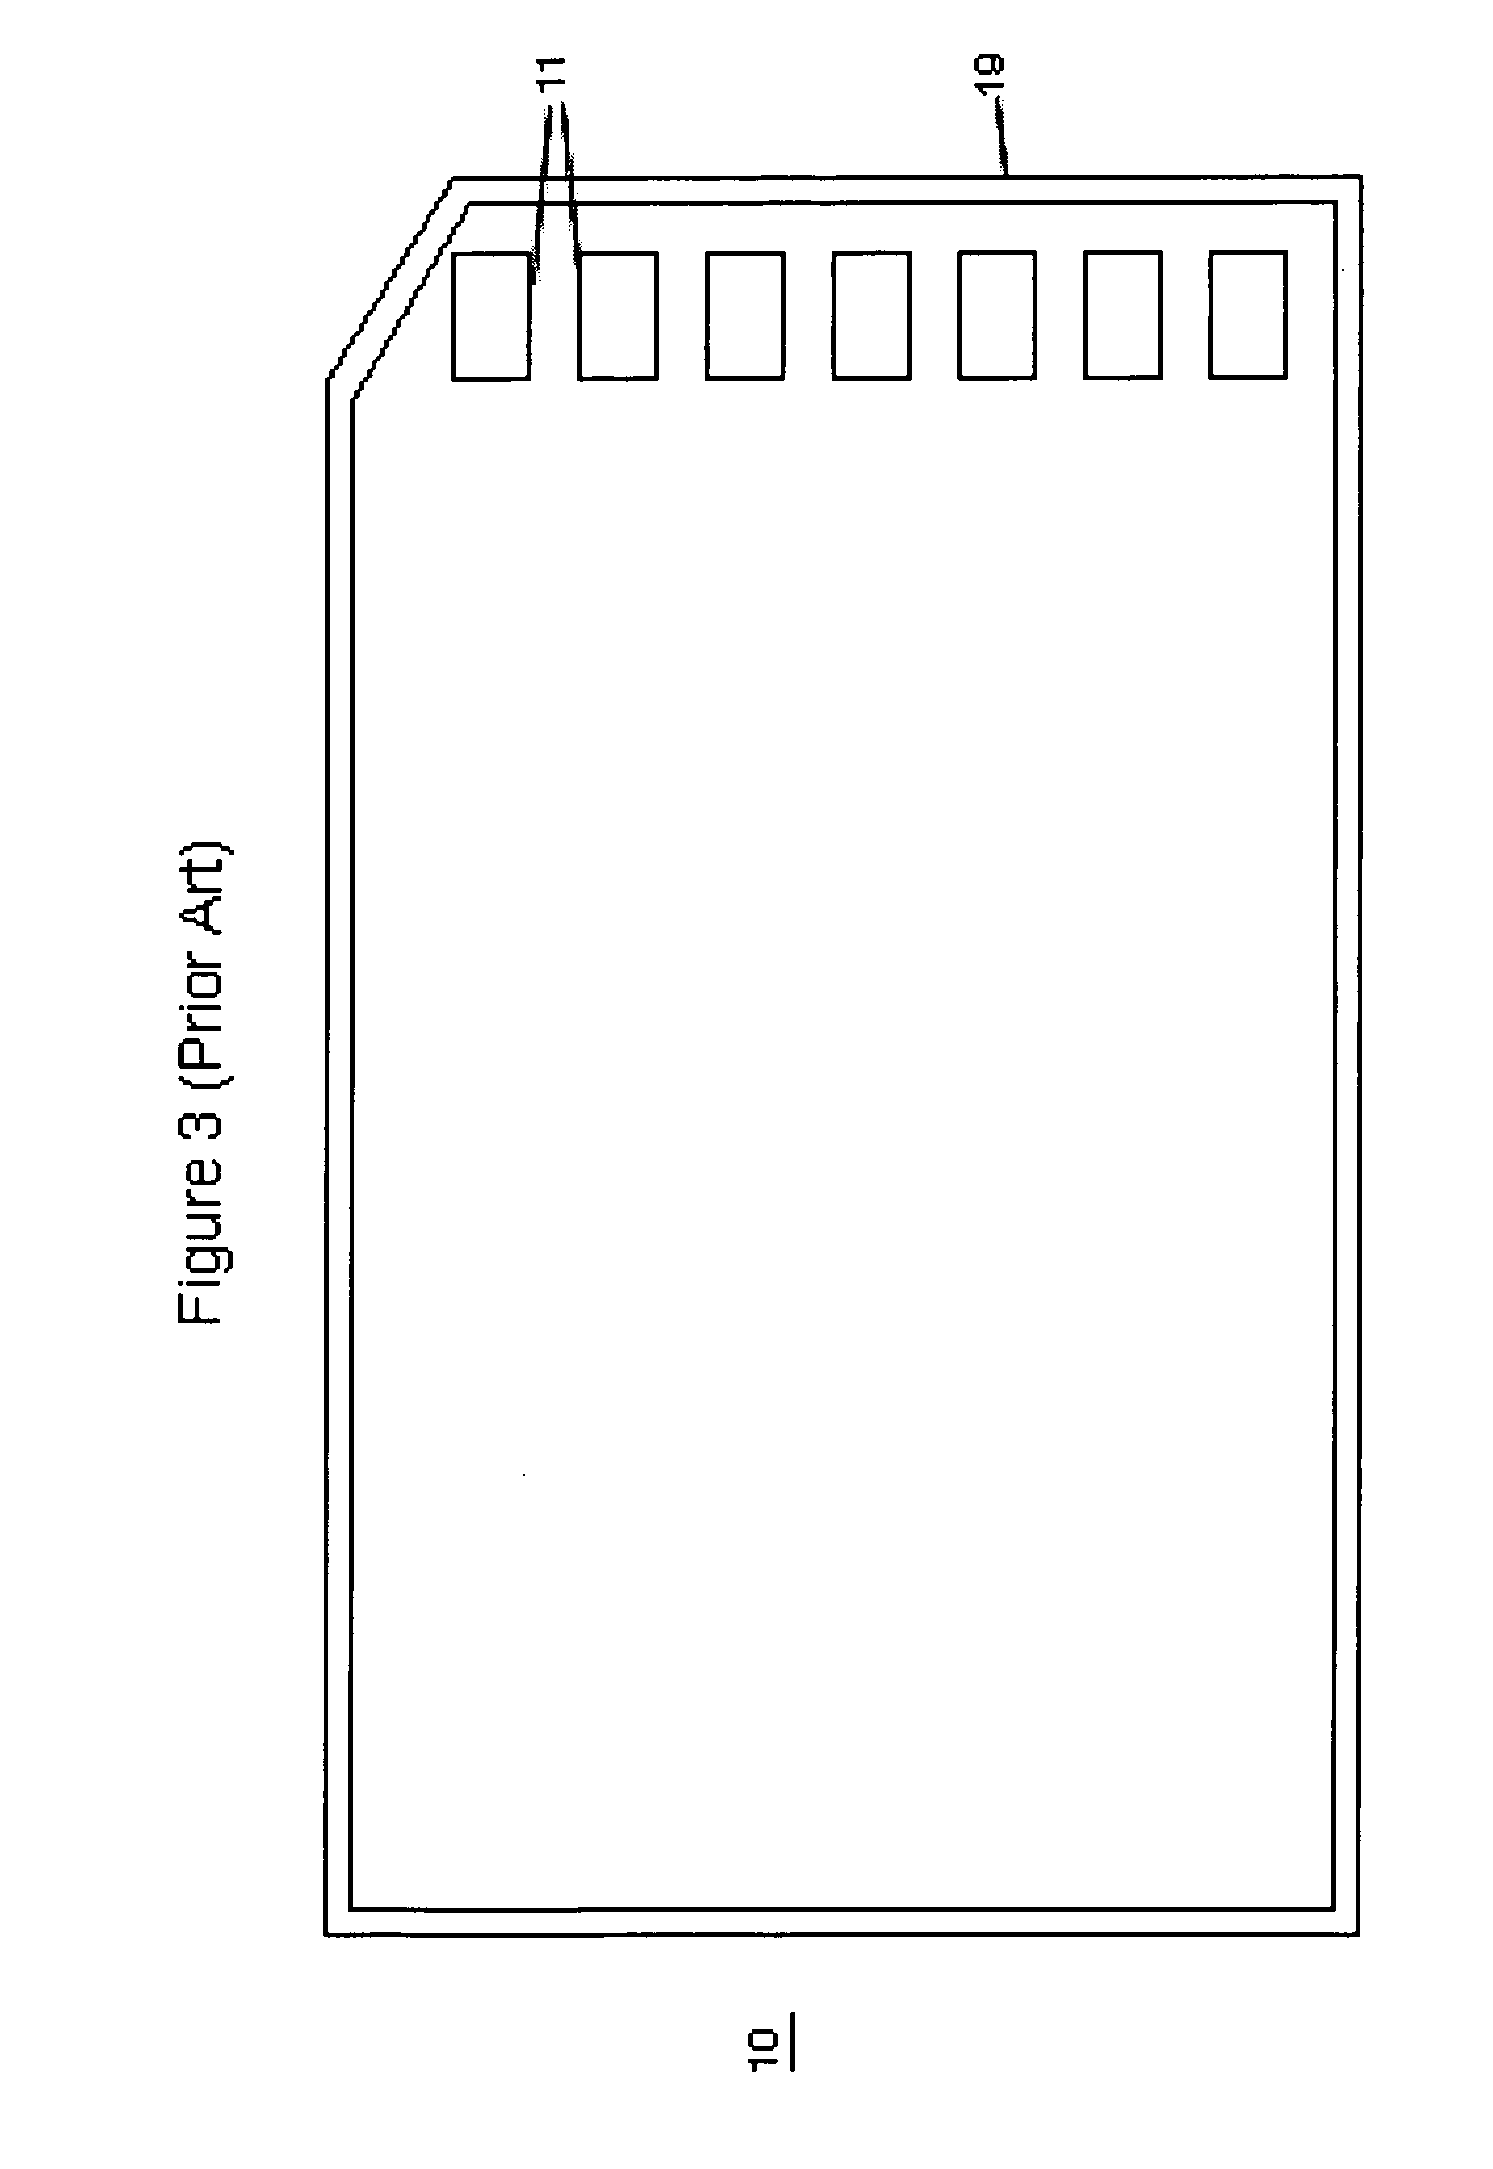 Method for making memory cards and similar devices using isotropic thermoset materials with high quality exterior surfaces